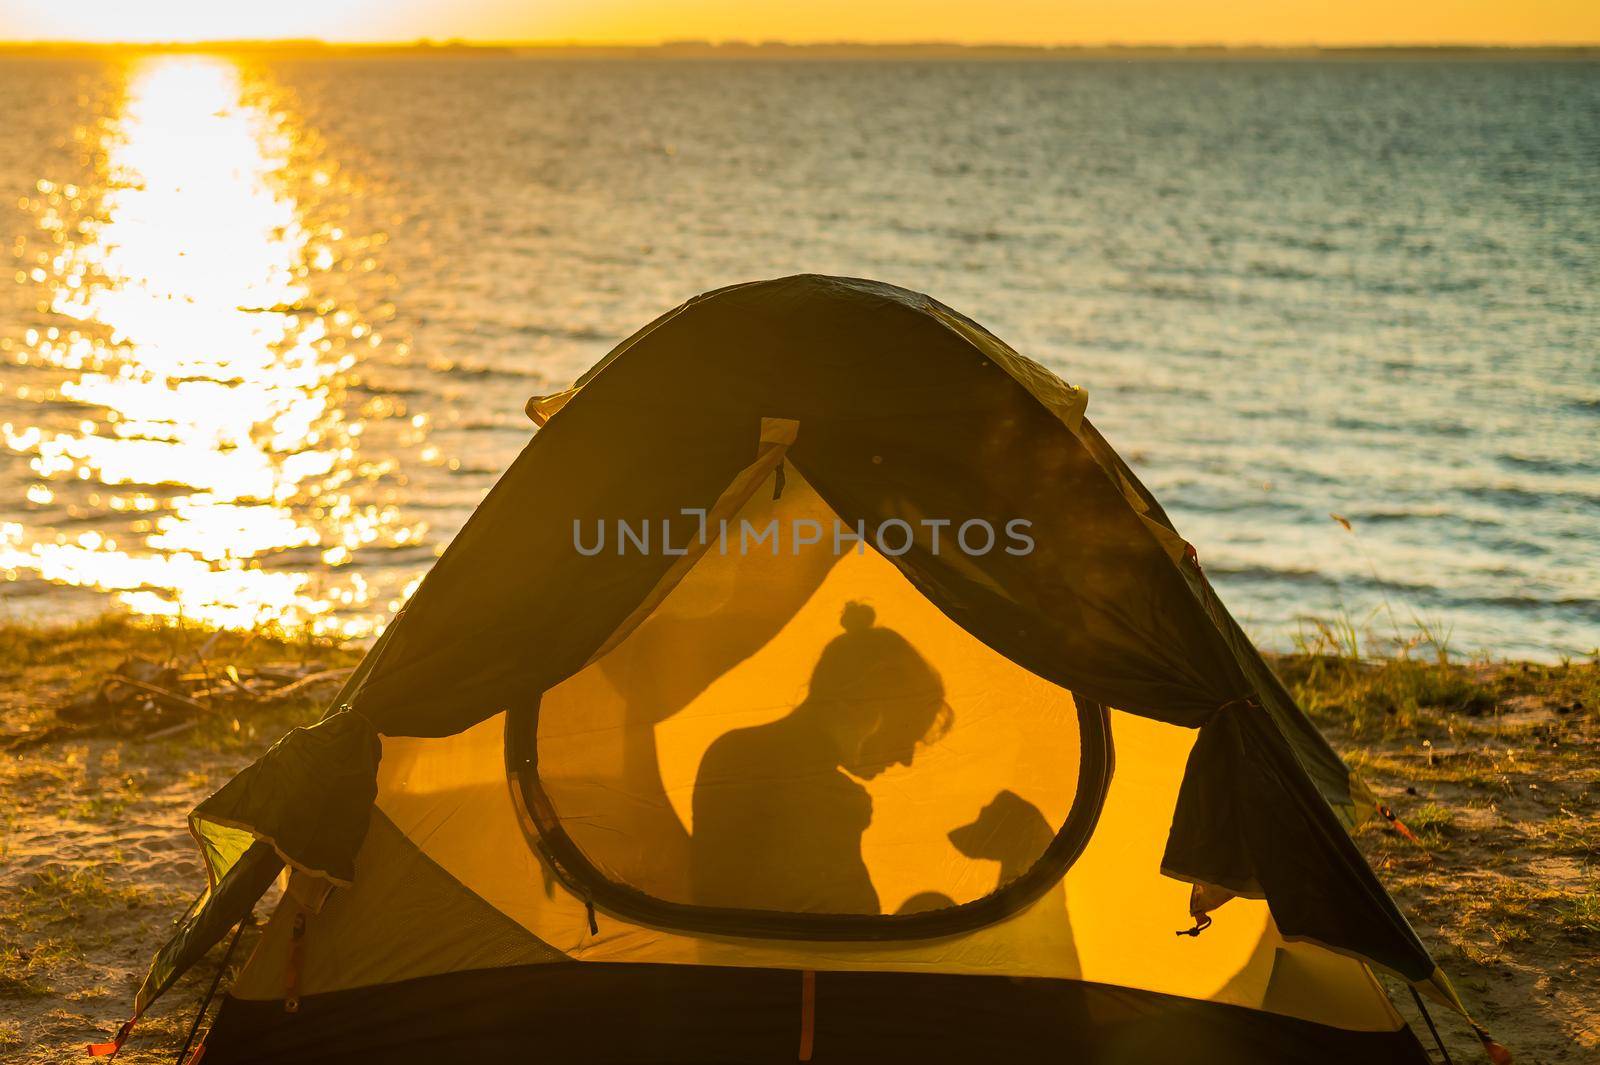 Woman and dog in a tourist tent at sunset. Camping with a pet.